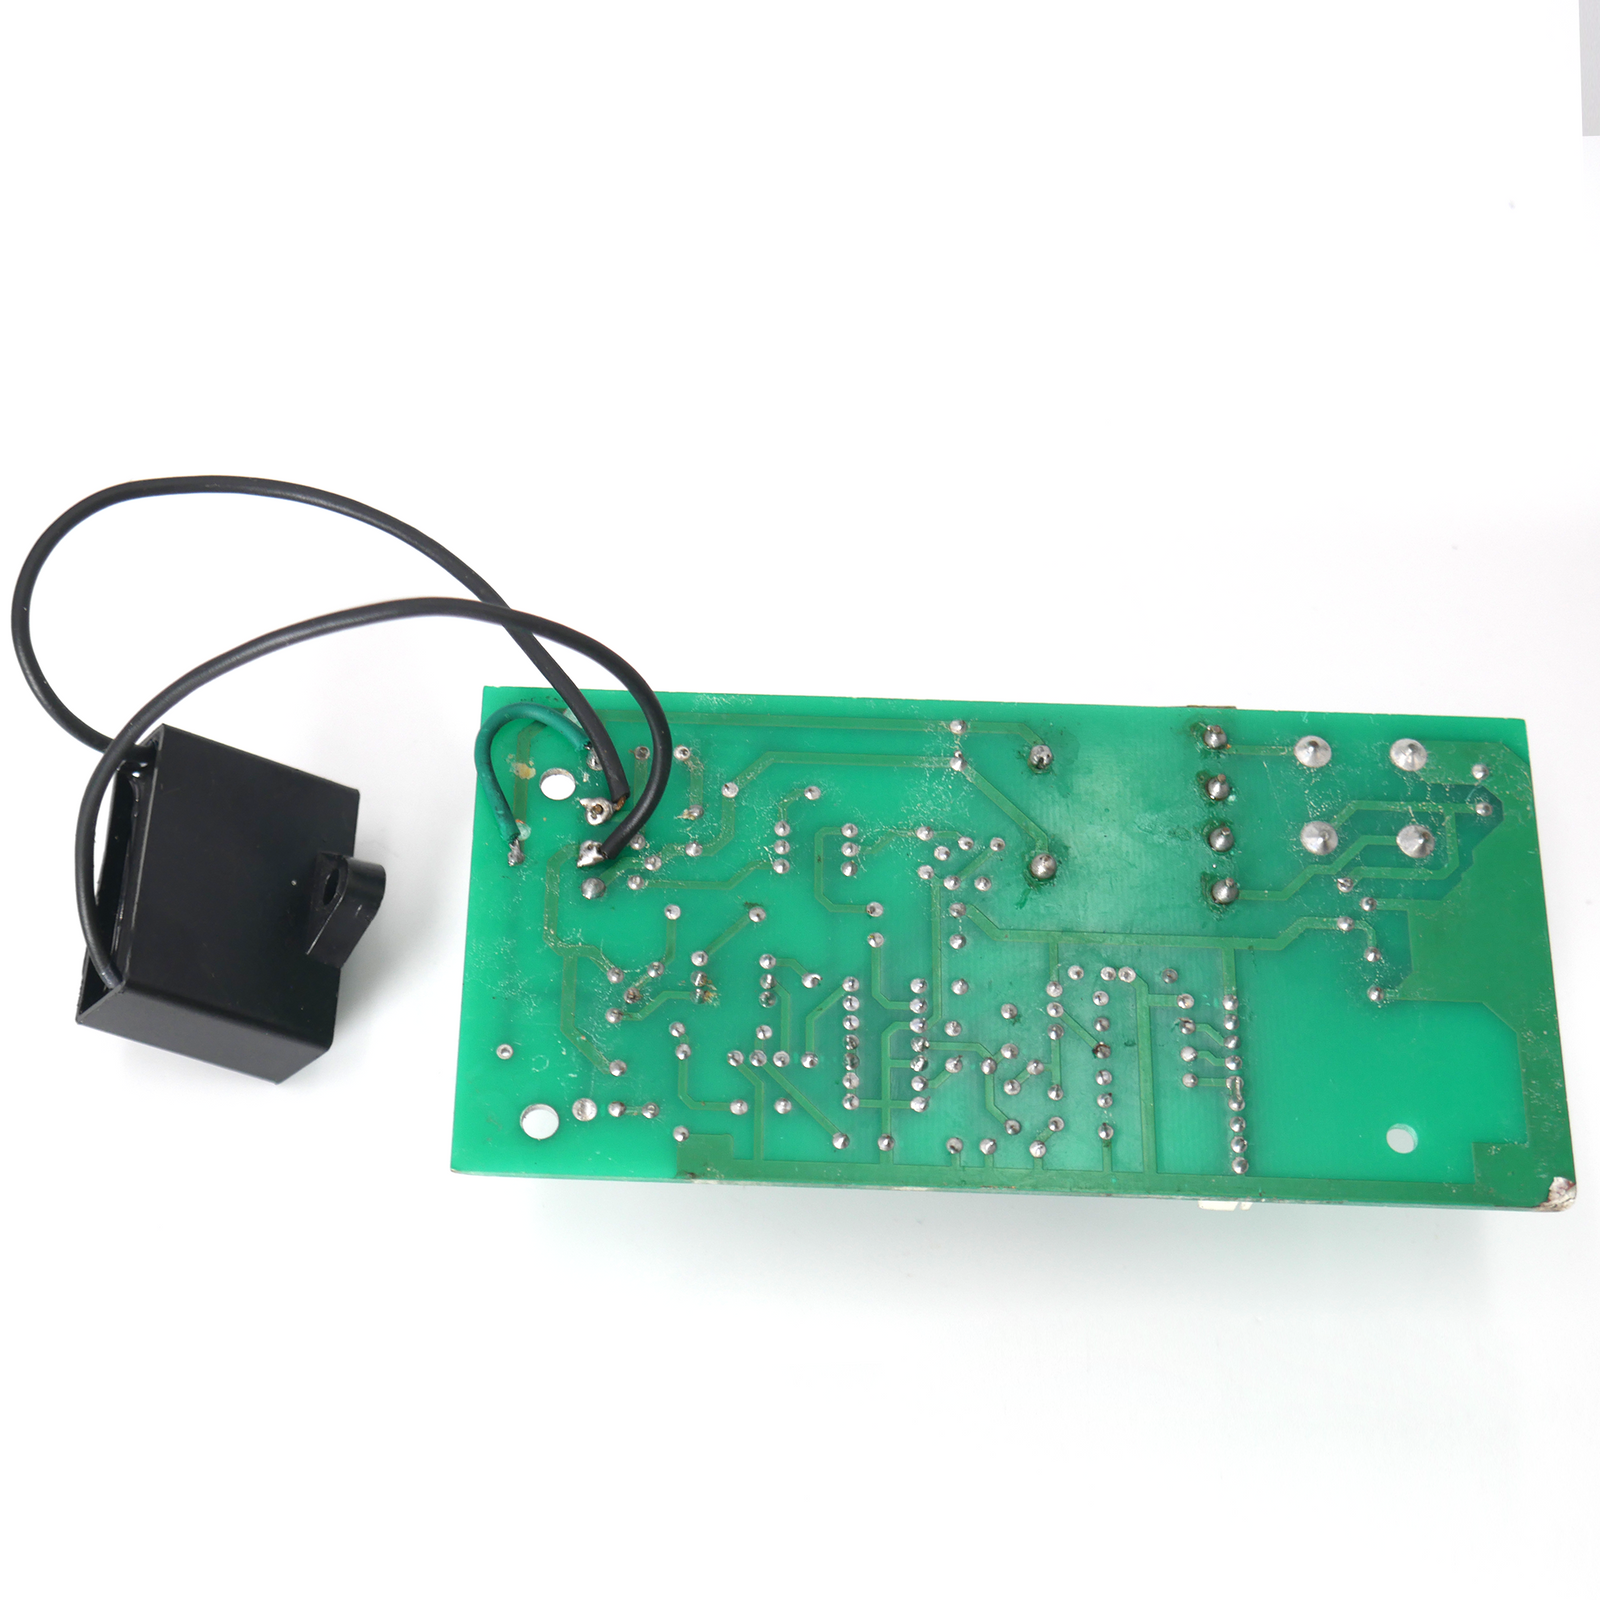 Motor regulator PCB for continuous band sealers